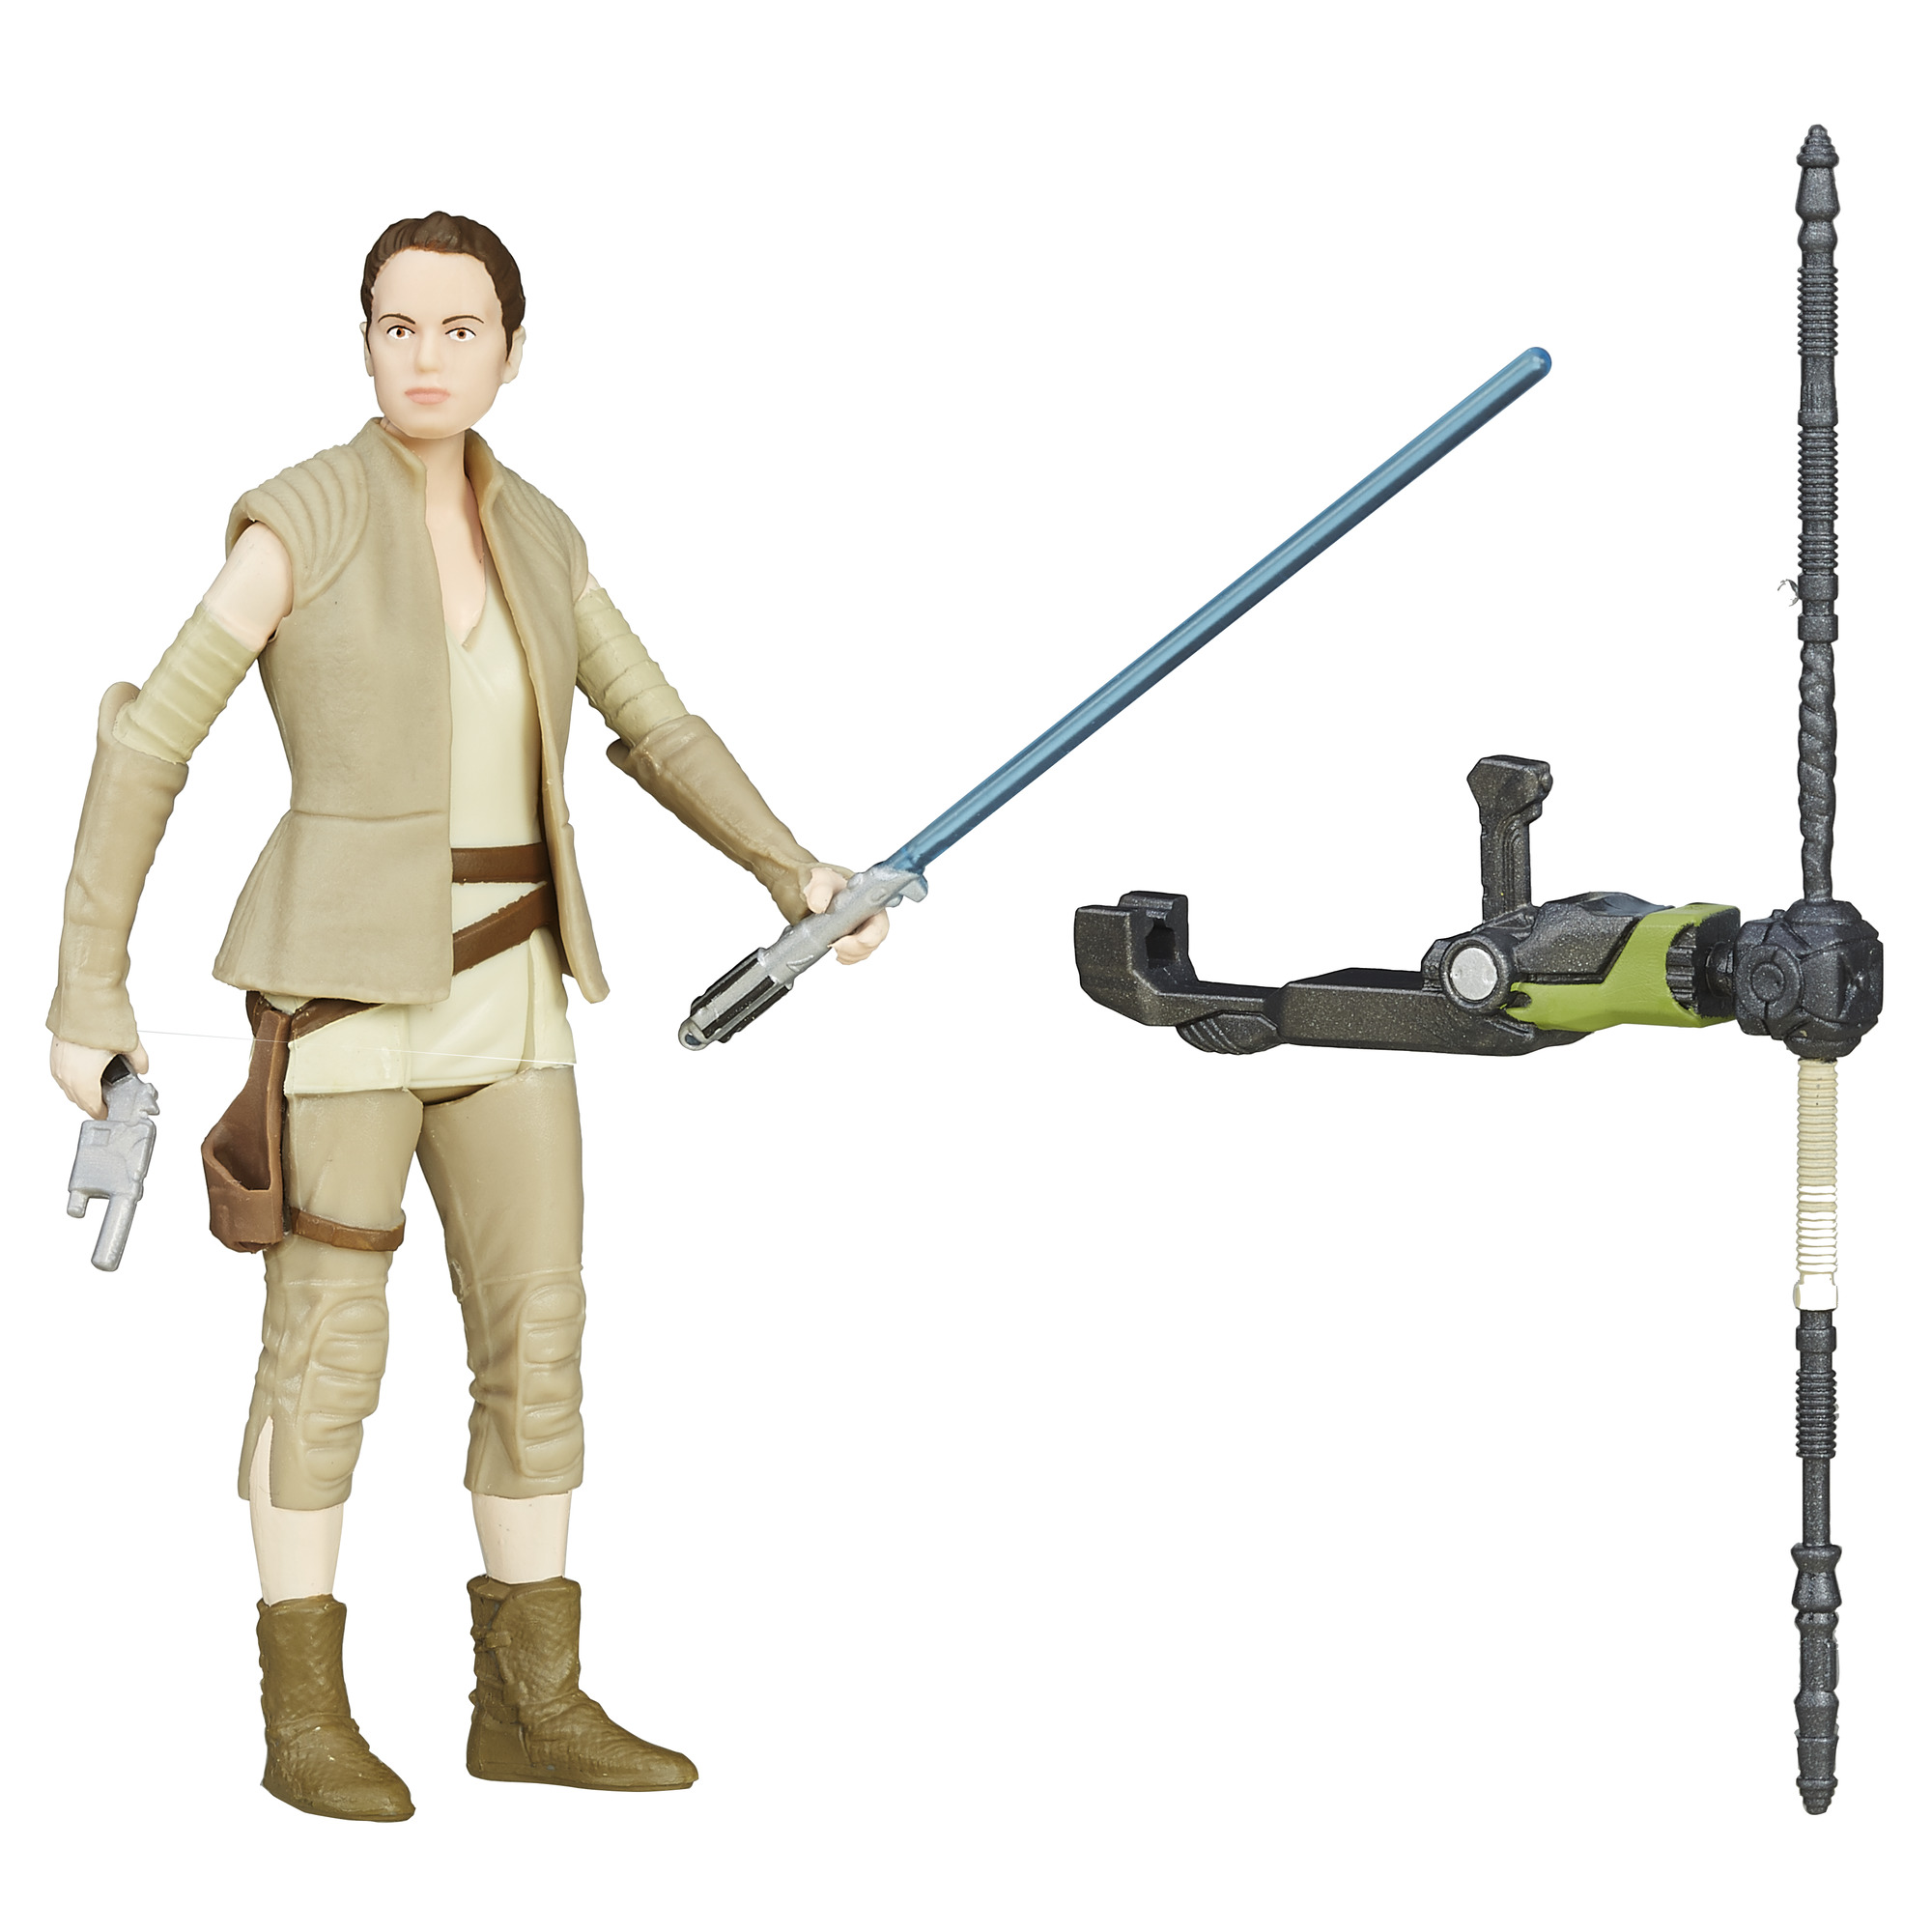 Star Wars Episode VII - 3.75" Rey (Resistance Outfit) Figure by Disney/Hasbro - image 1 of 2